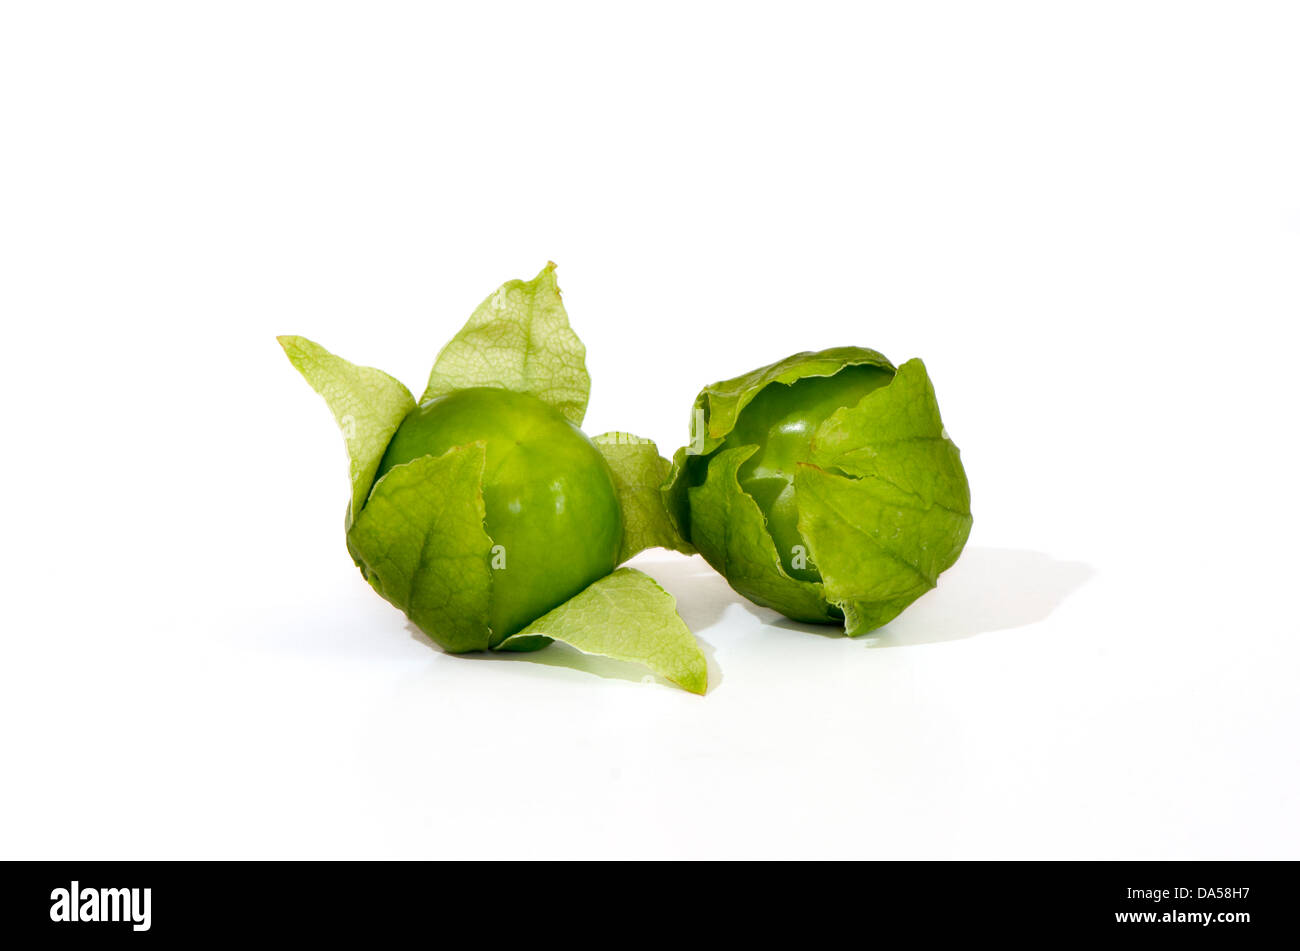 Close-up of two Green tomatillo, Physalis philadelphica, fruit on white background. Stock Photo